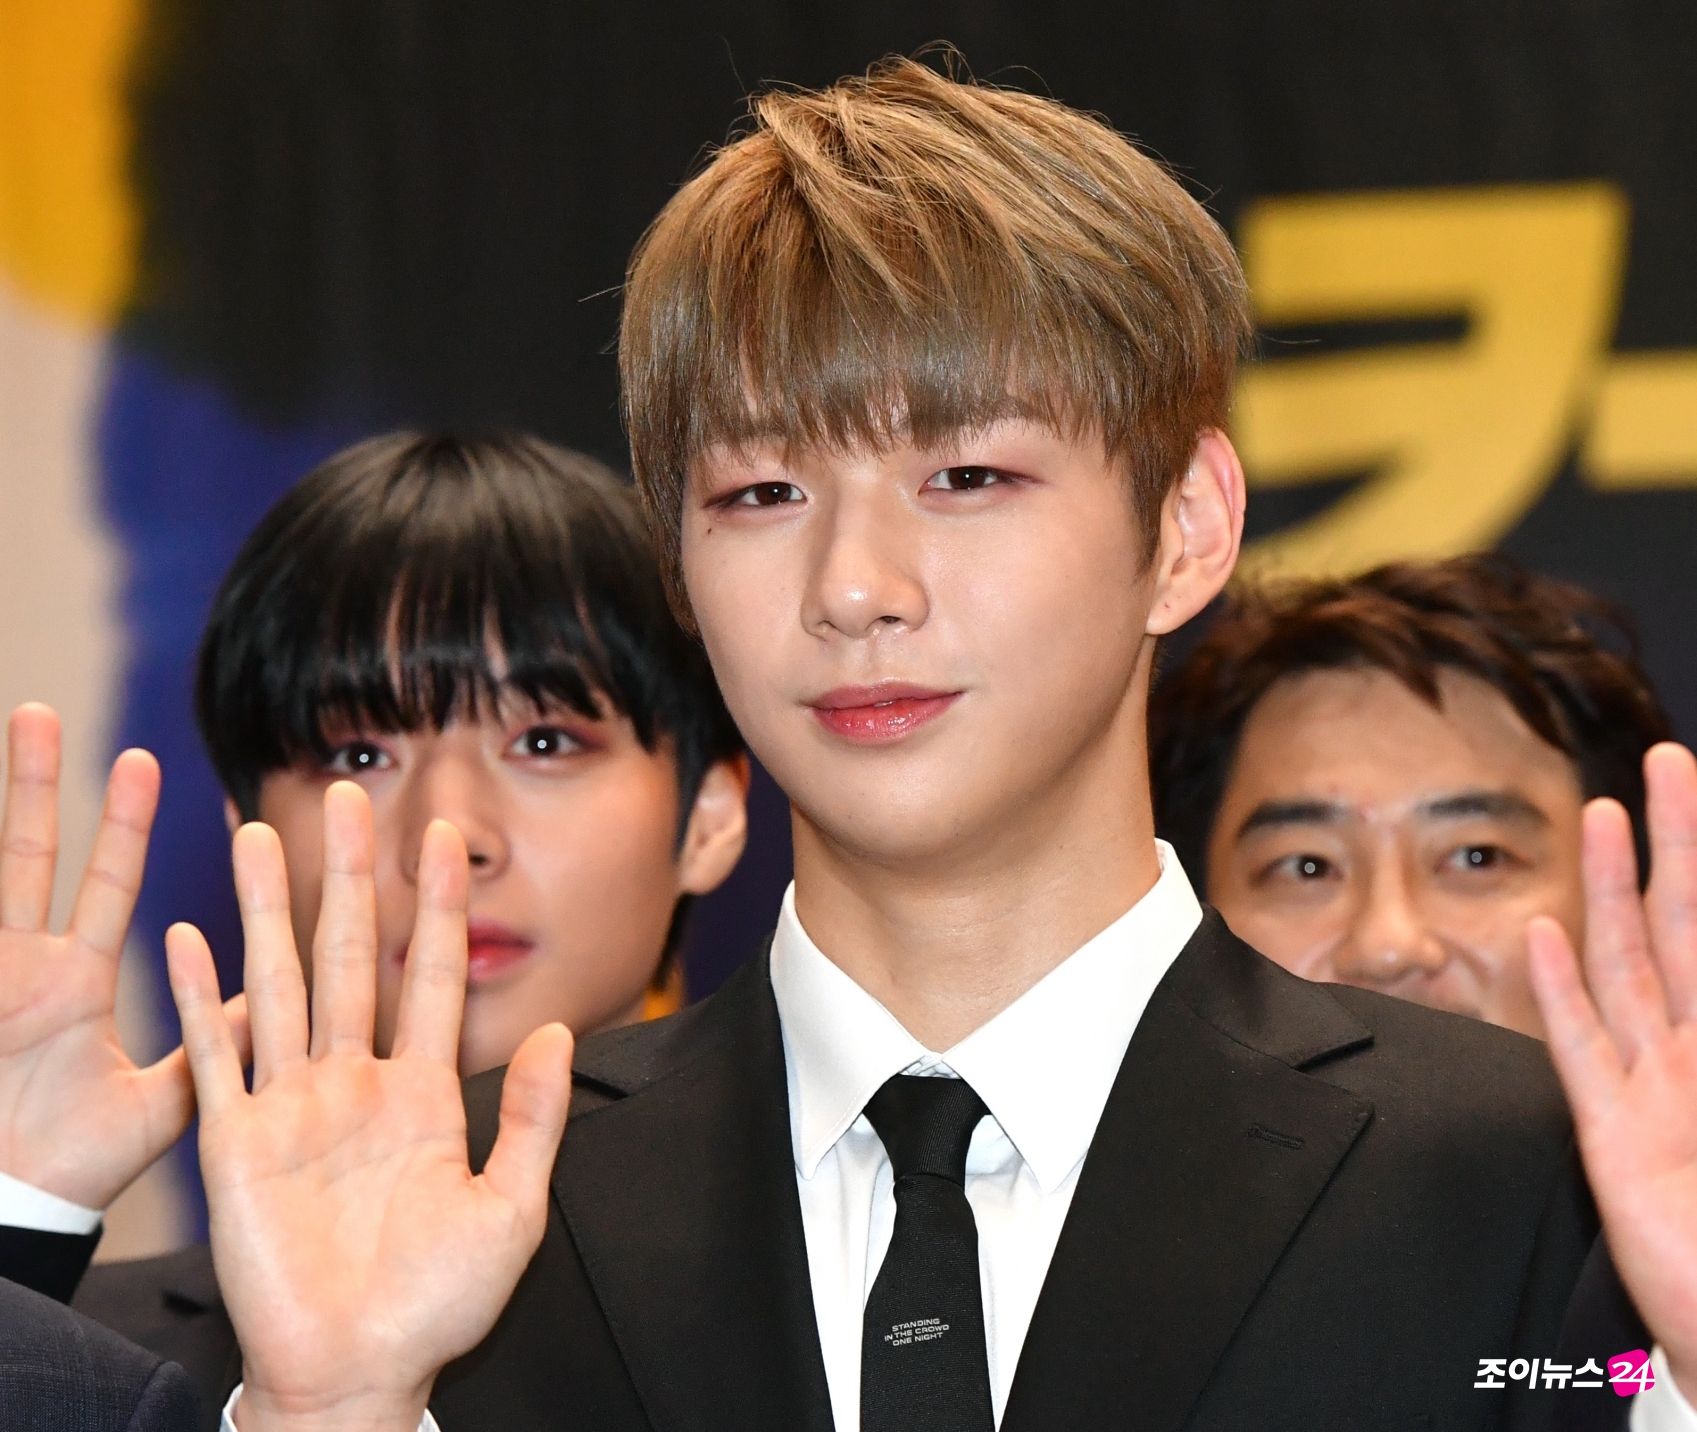 <p><></p><p>Group Wanna One River Daniel has taken a commemorative photo after participating in the 2018 National Brand Conference held at the Yeouido National Assembly Hall on September 5 and receiving the Cultural Revolution National Brand Award.</p><p>2018 National Brand Awards In the Arts department, the violinist Jung Kyung-hwa was chosen as the violinist Wanna One in the Cultural Revolution department, Pyeong Chang 2018 Olympic Winter Games closing ceremony Skeleton gold medalist Yun Sung bin in the sports division.</p>